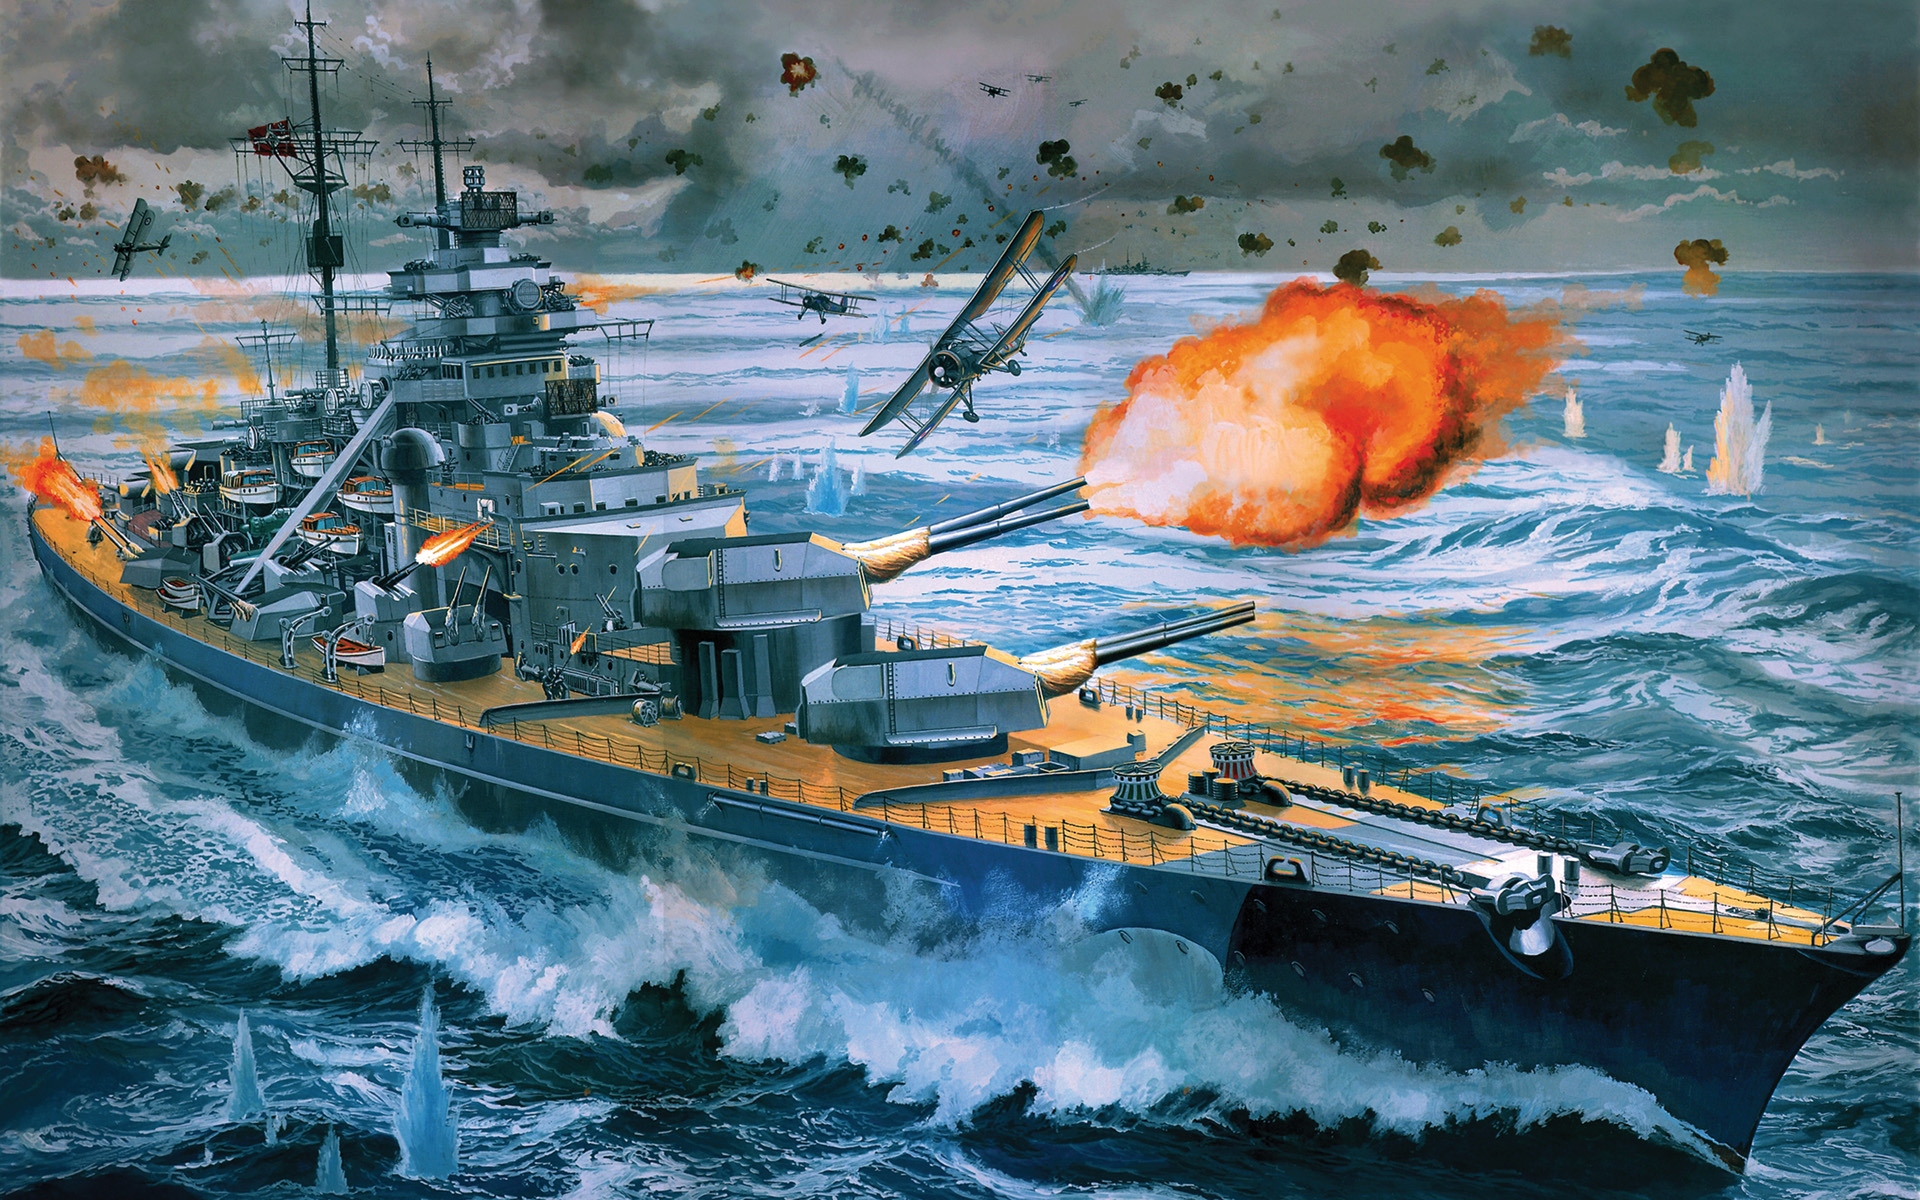 Bismarck is shown under attack by British Fairey Swordfish torpedo biplanes from the HMS Ark Royal in a modern painting. One torpedo jammed its rudder, crippling the battleship by causing her to steam erratically. 